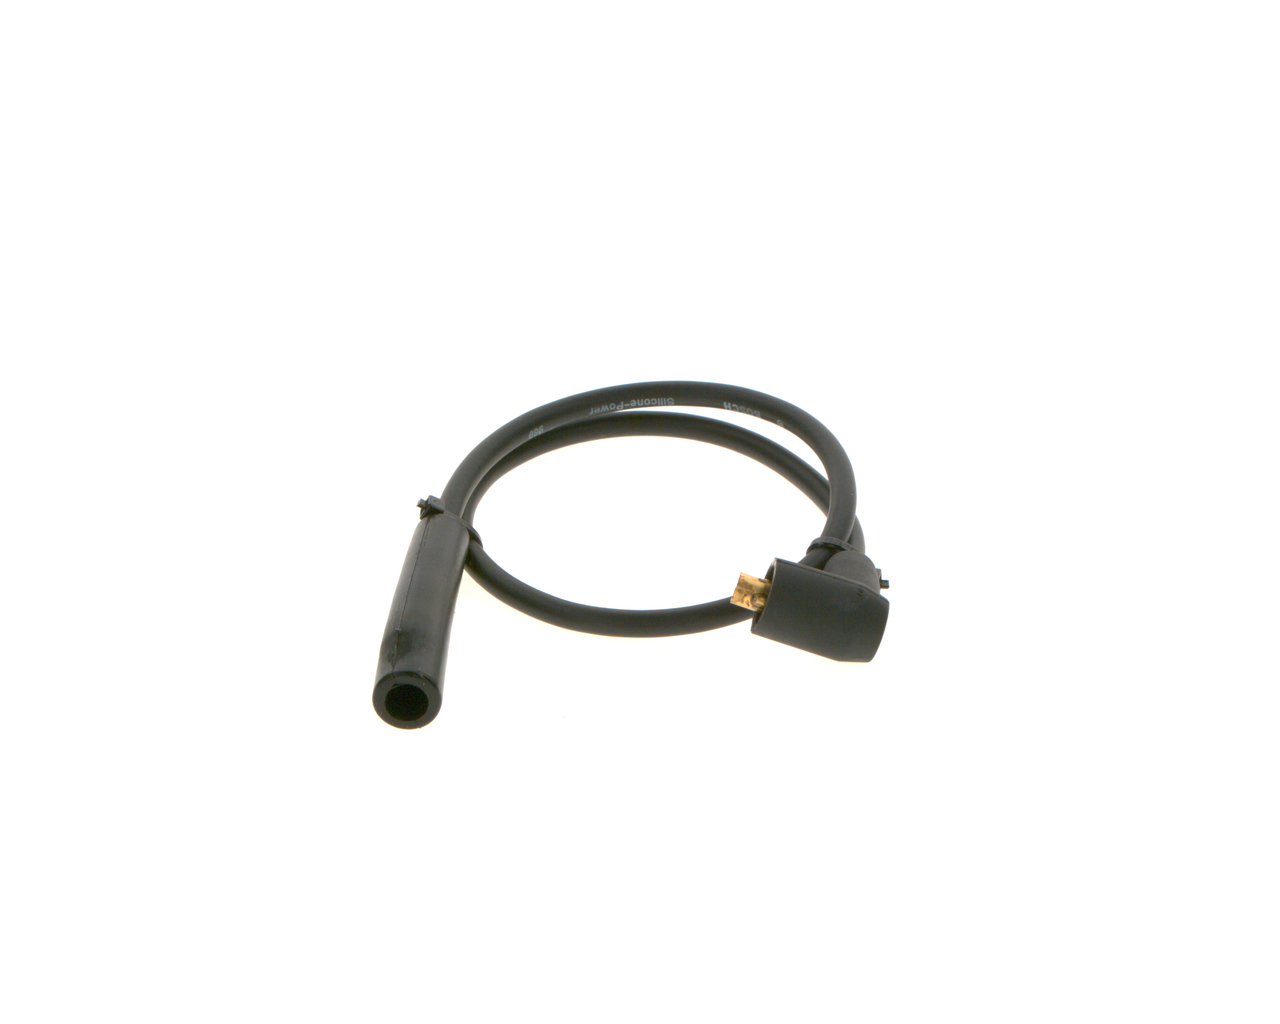 0986356859, Ignition Cable Kit, BOSCH, 8BBE-18-140, 8BBJ-18-140, 8BBP-18-140, 8BBR-18-140, 8BBY-18-140, 8BE2-18-140, 4060, 600/240, 73110, B859, DKB317, RC-ZE07, ZEF856, 0300890856